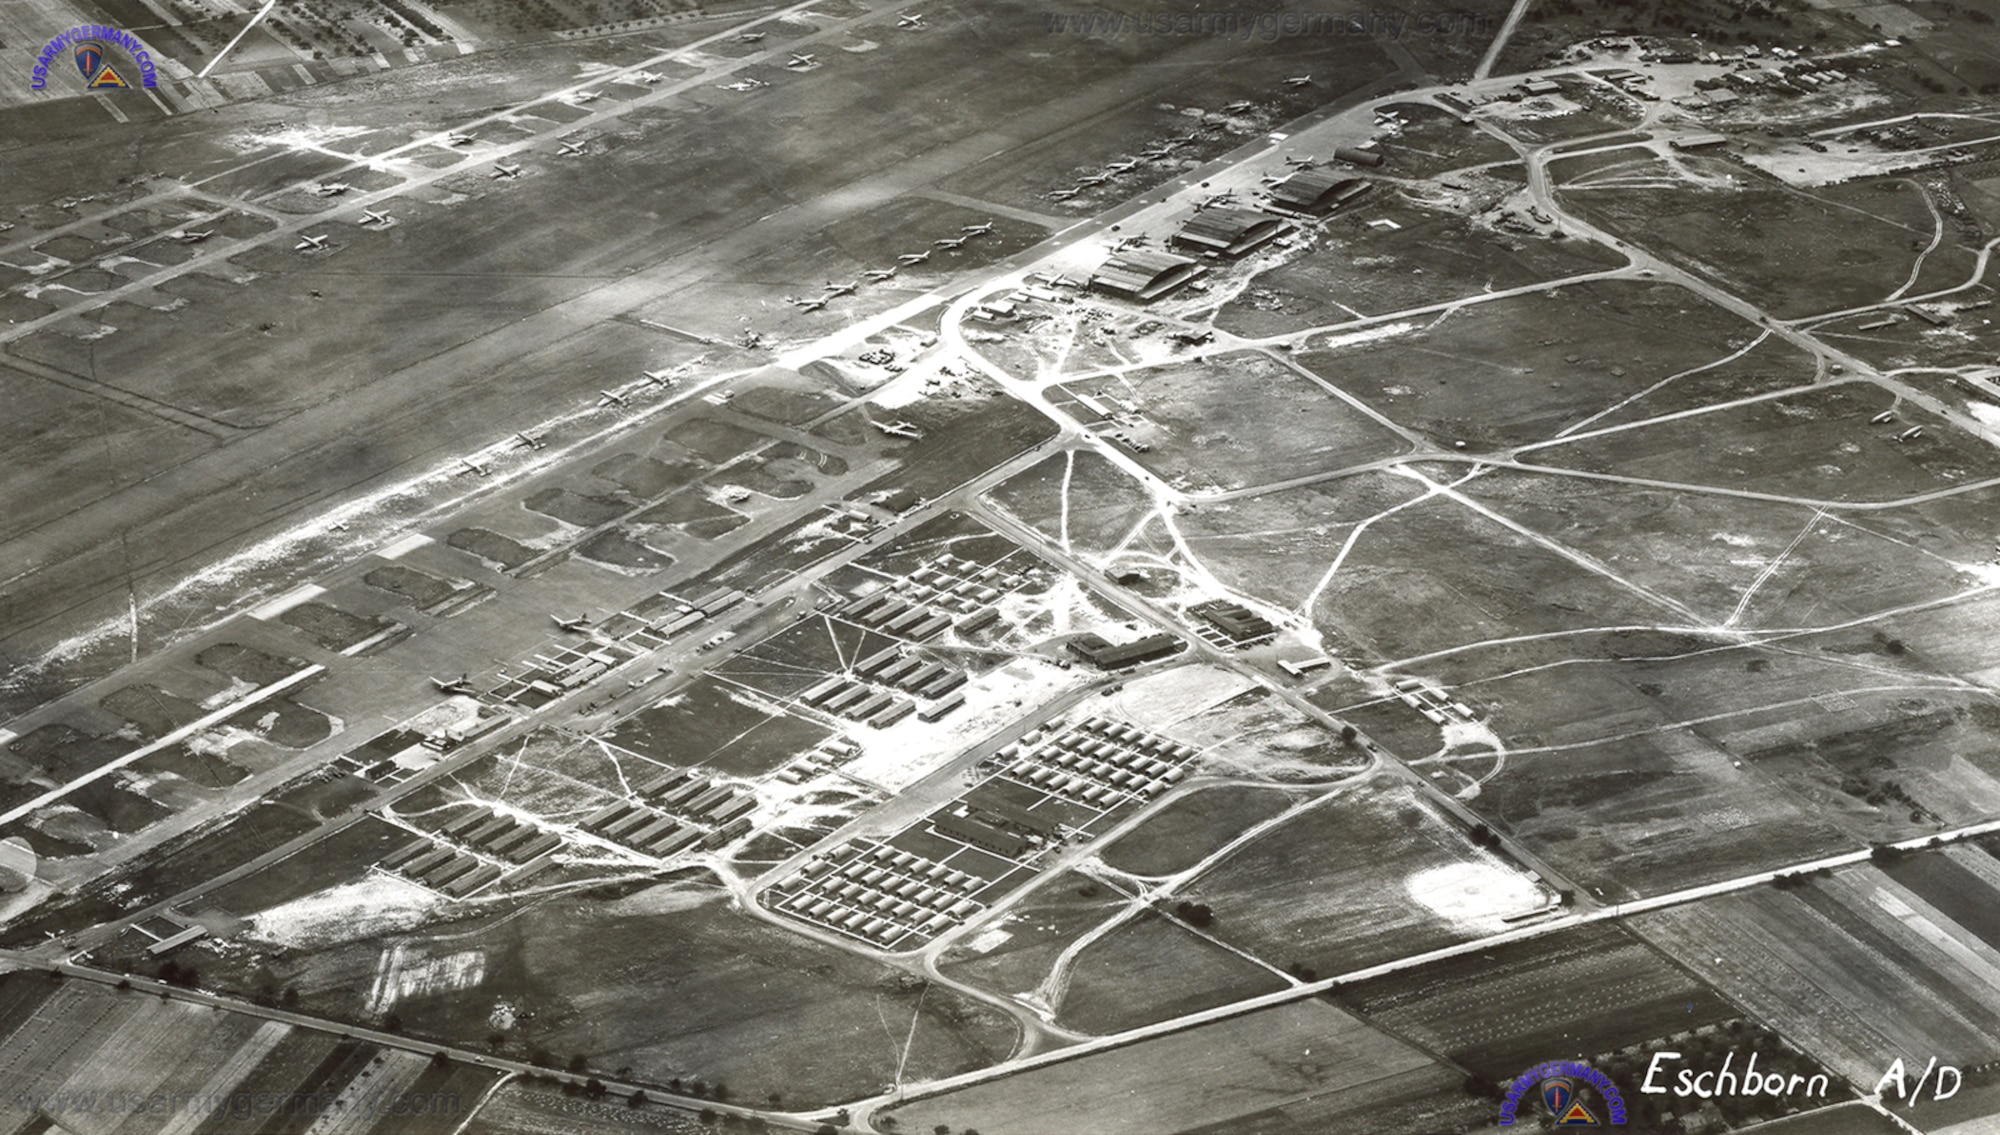 Frankfurt/Eschborn Airfield (Advanced Landing Ground Y-74) was the base of origin for the last mission of Capt. “Shorty” Bales on April 13, 1945.  The 371st Fighter Group operated from this field from April 7 through V-E Day on May 8, 1945.  This postwar (1946) photo shows the field in use by C-47 transport aircraft of the European Air Transport Service, the fighters having long moved on to other bases. (US Army Germany.com)